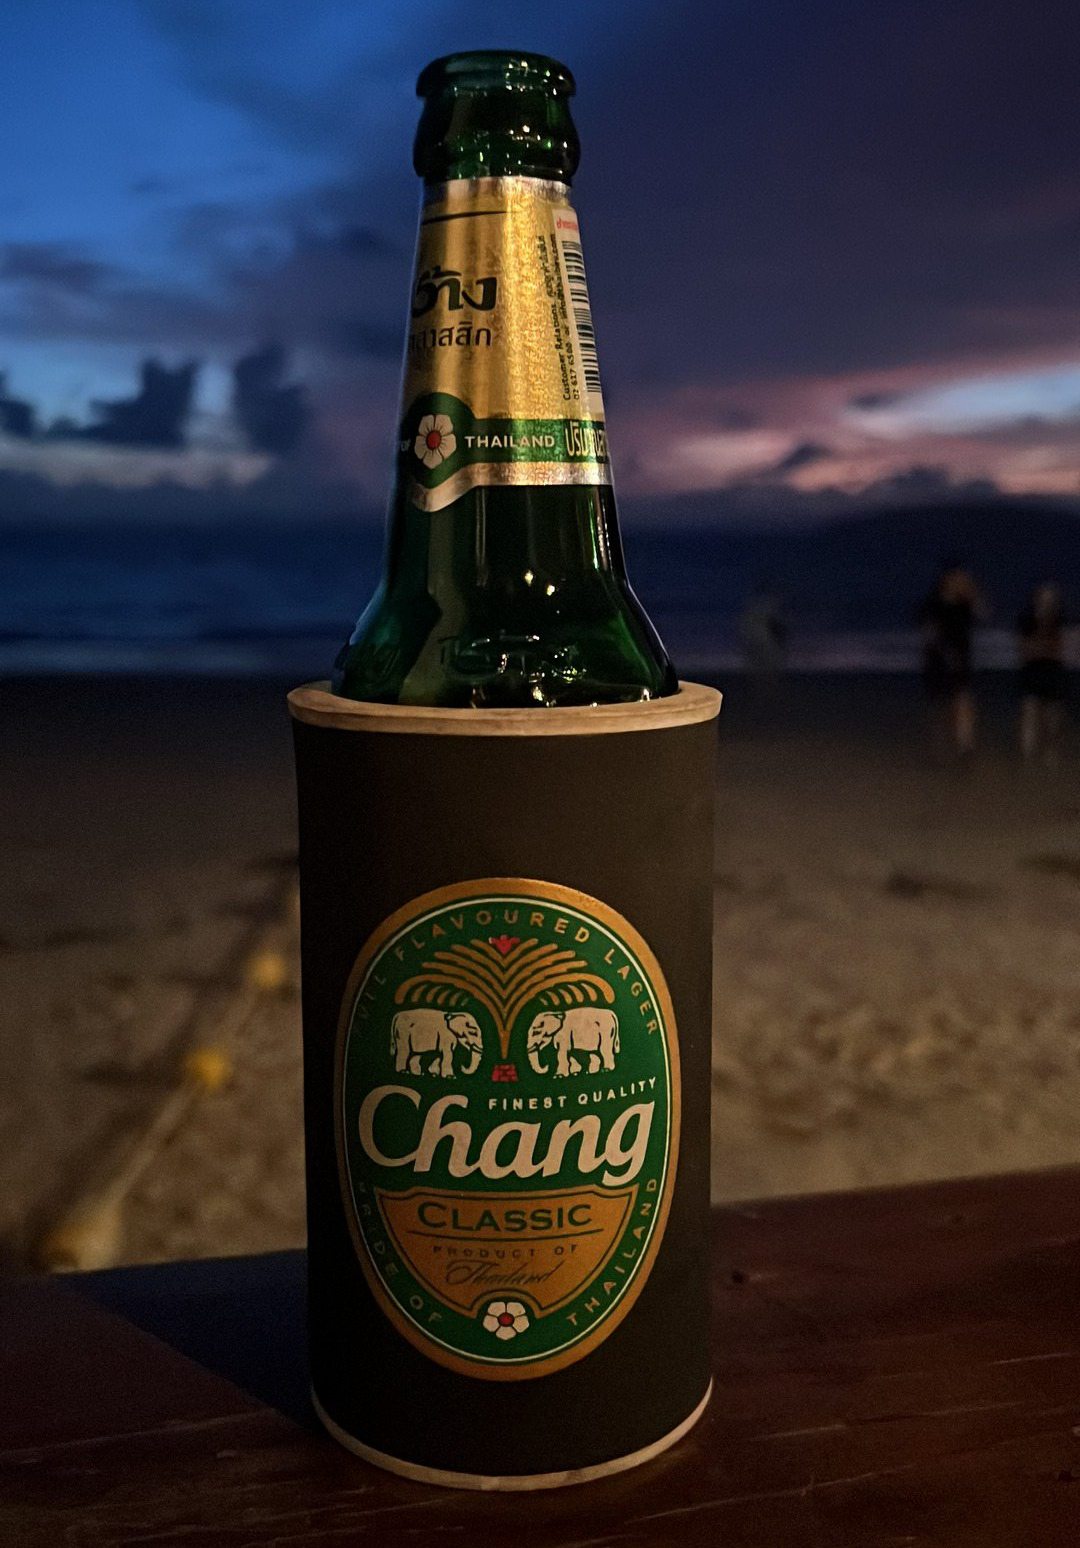 Bottle of Chang beer at Railay Beach in Thailand. Shotguns, markets and temples in Bangkok